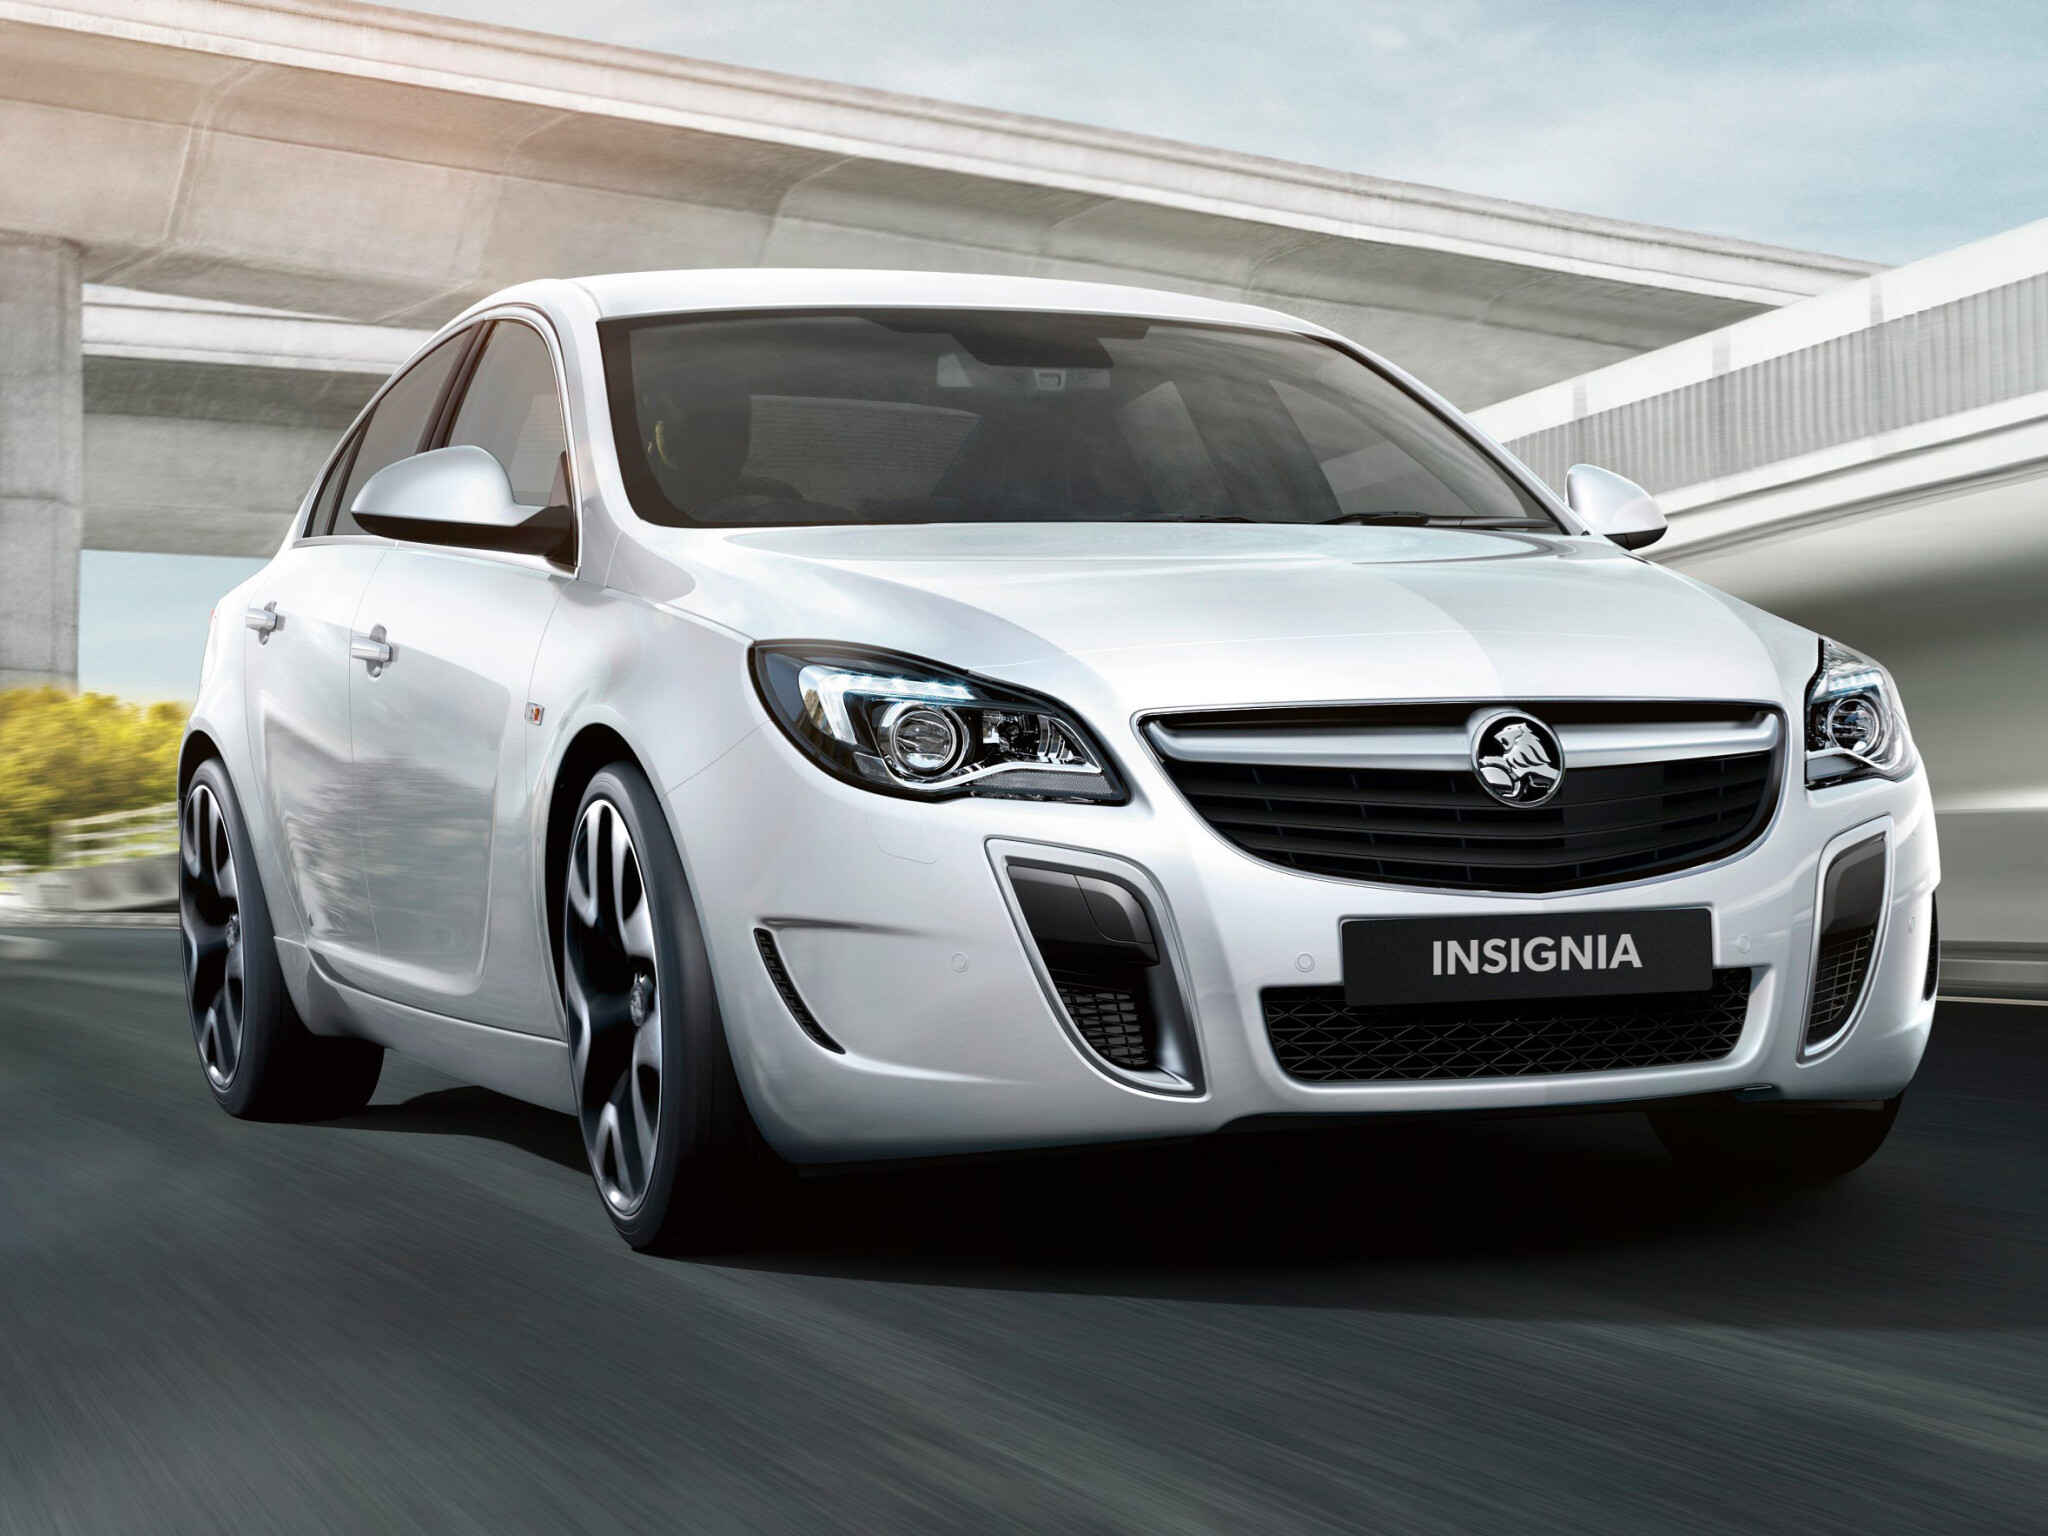 2015 Holden Insignia VXR First Drive Review